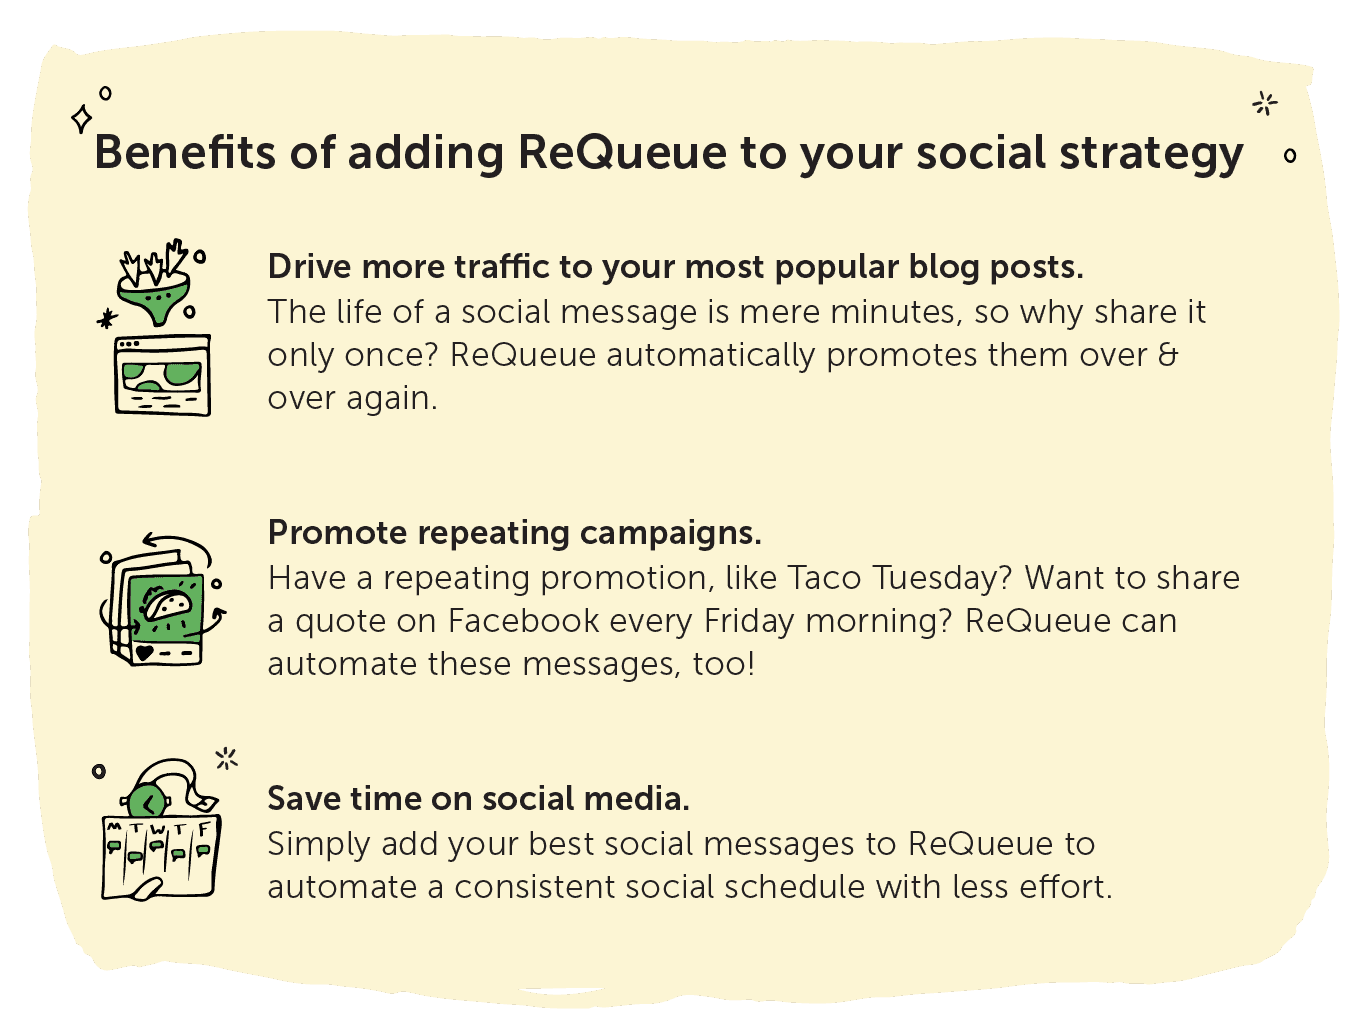 The benefits of adding ReQueue to your social strategy are listed as drive more traffic to your most popular blog posts, promote repeating campaigns, and save time on social media.